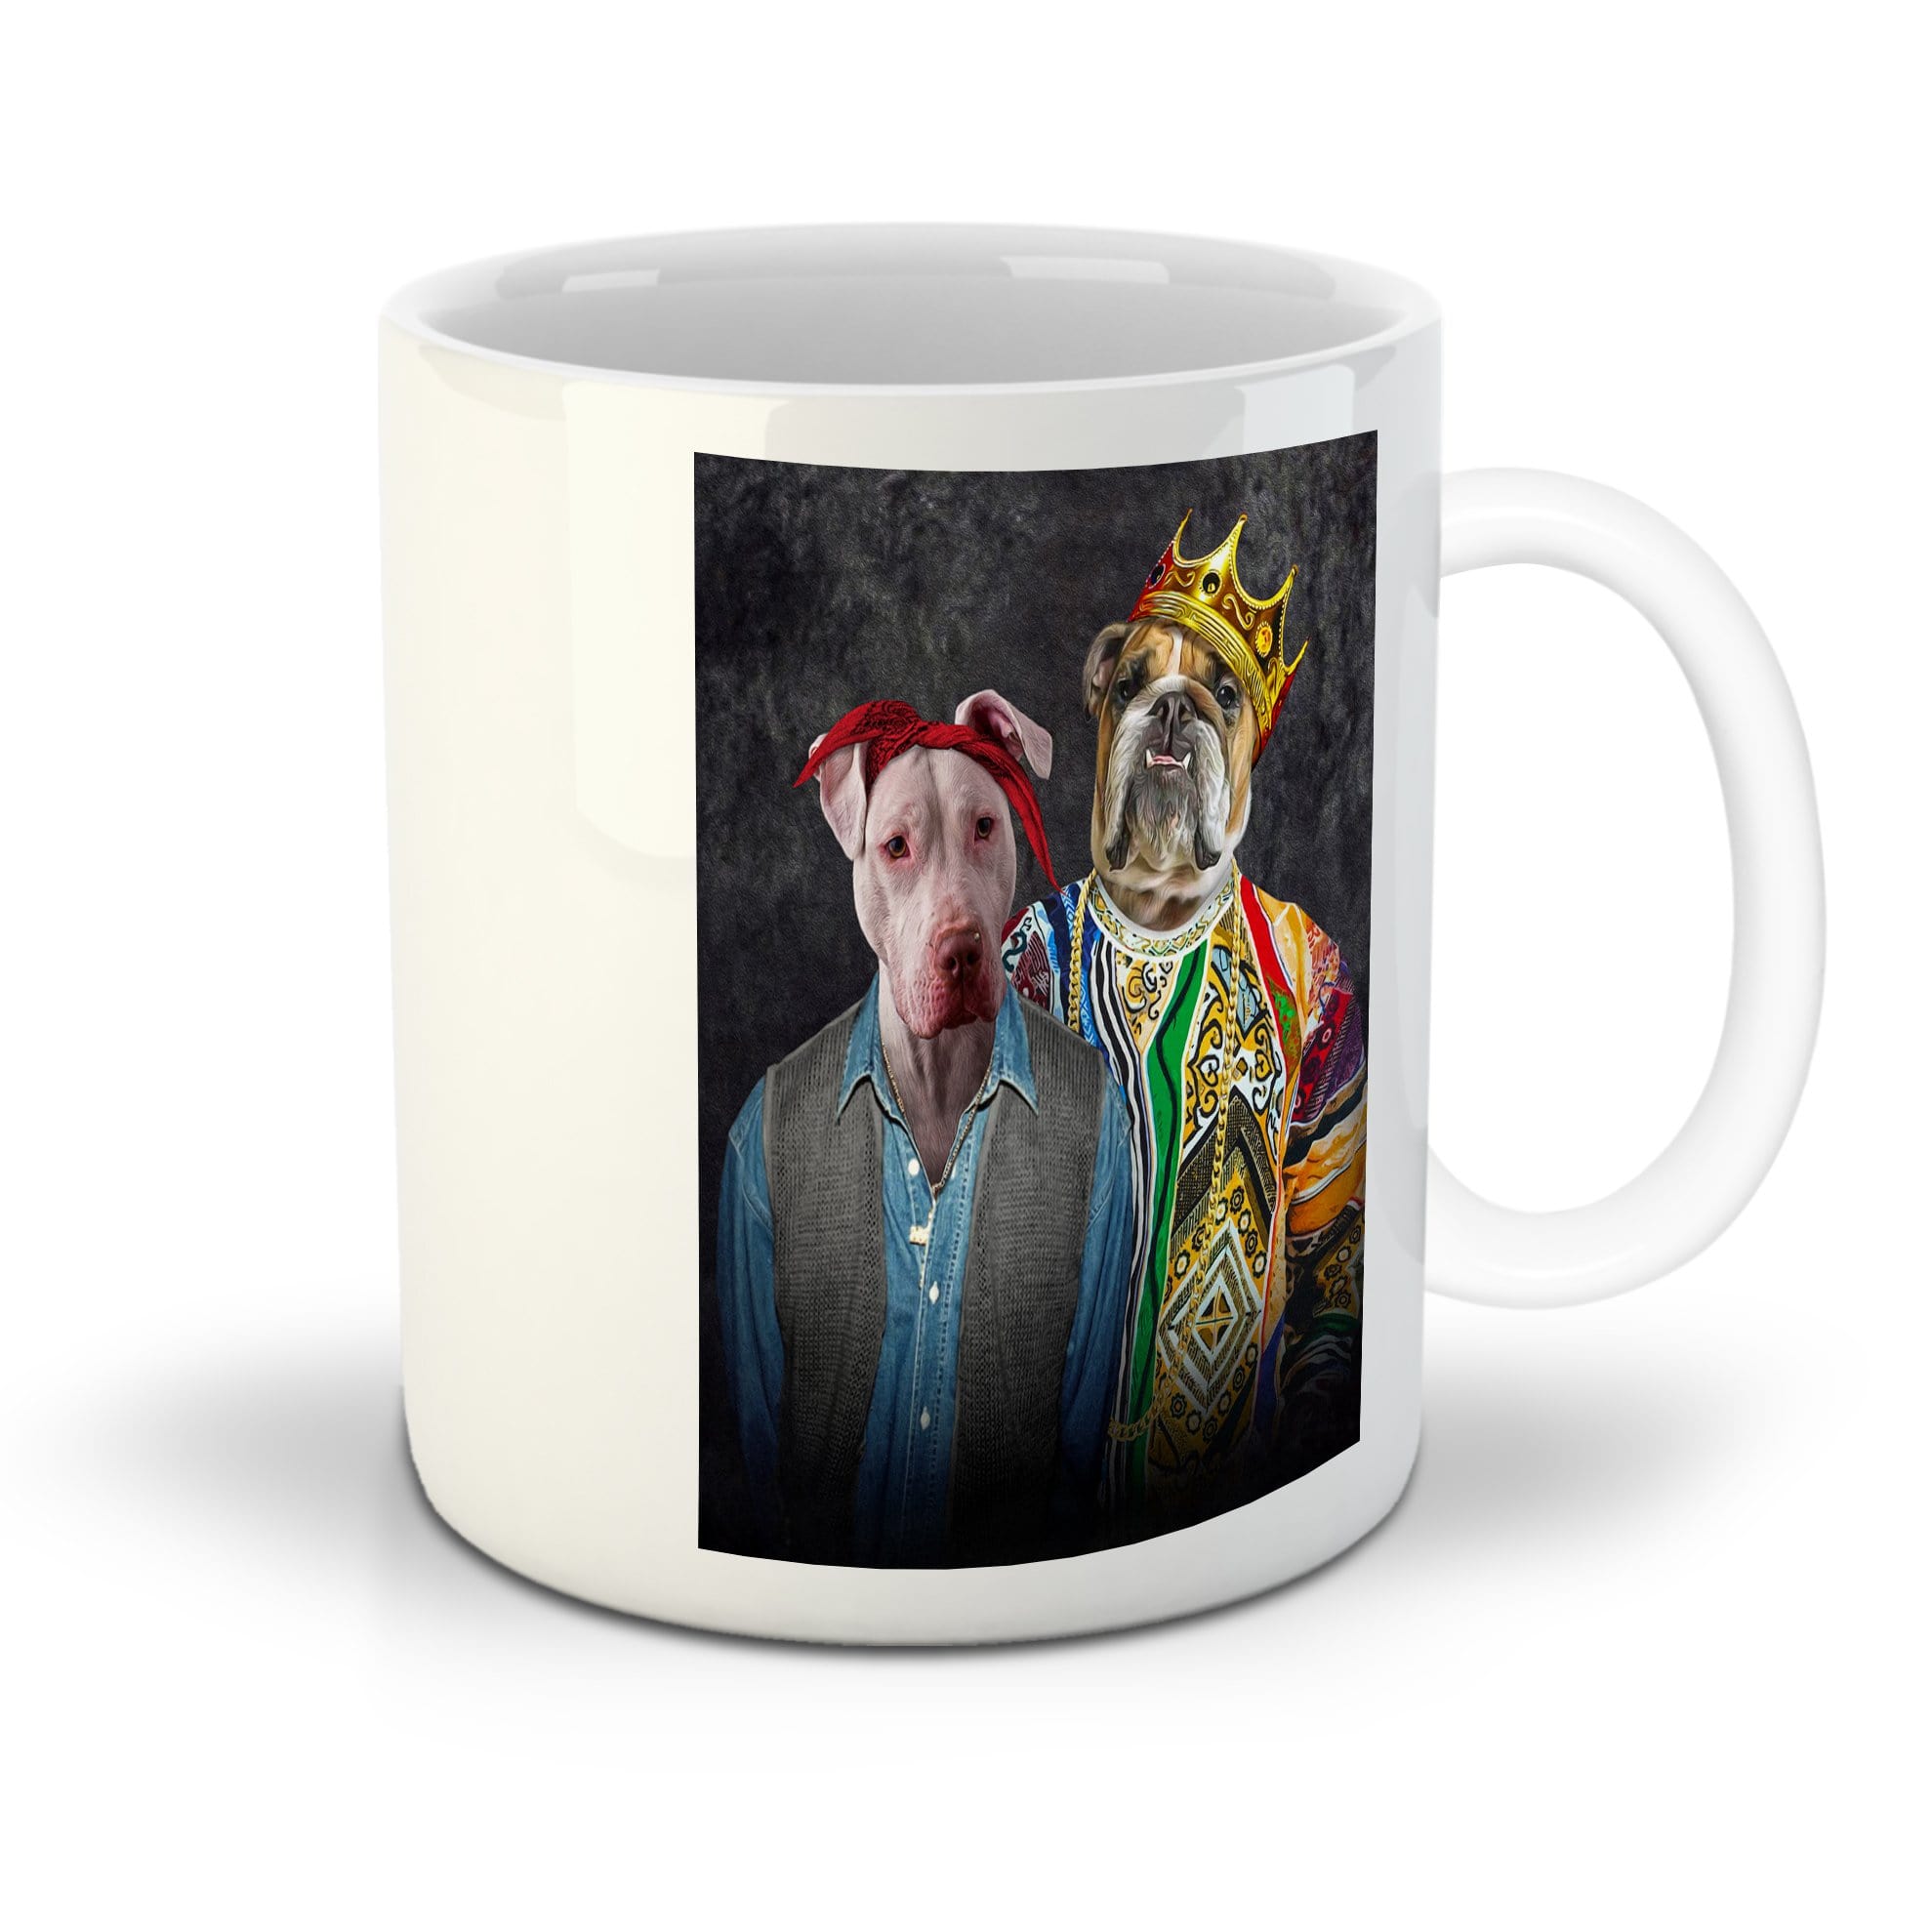 '2Paw And Notorious D.O.G.' Personalized 2 Pet Mug